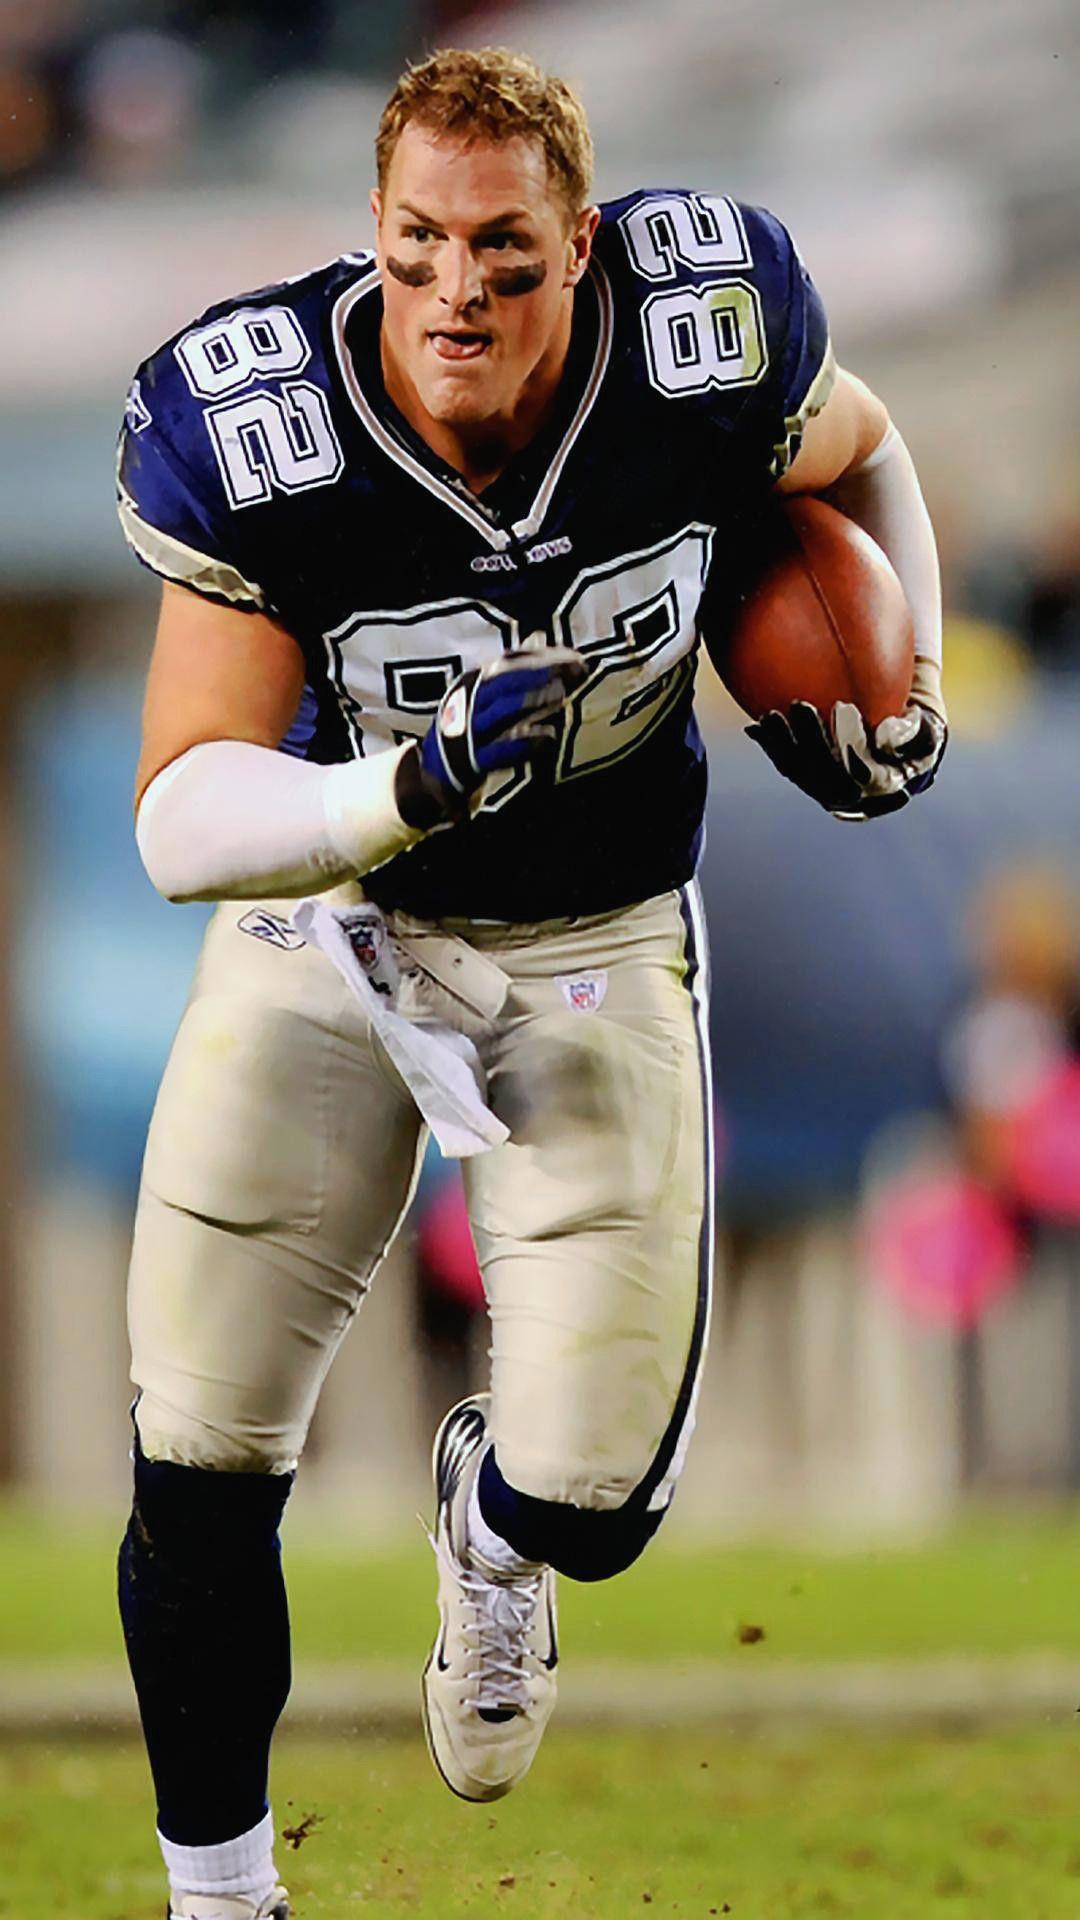 Jason Witten Wallpaper Download Image and Picture